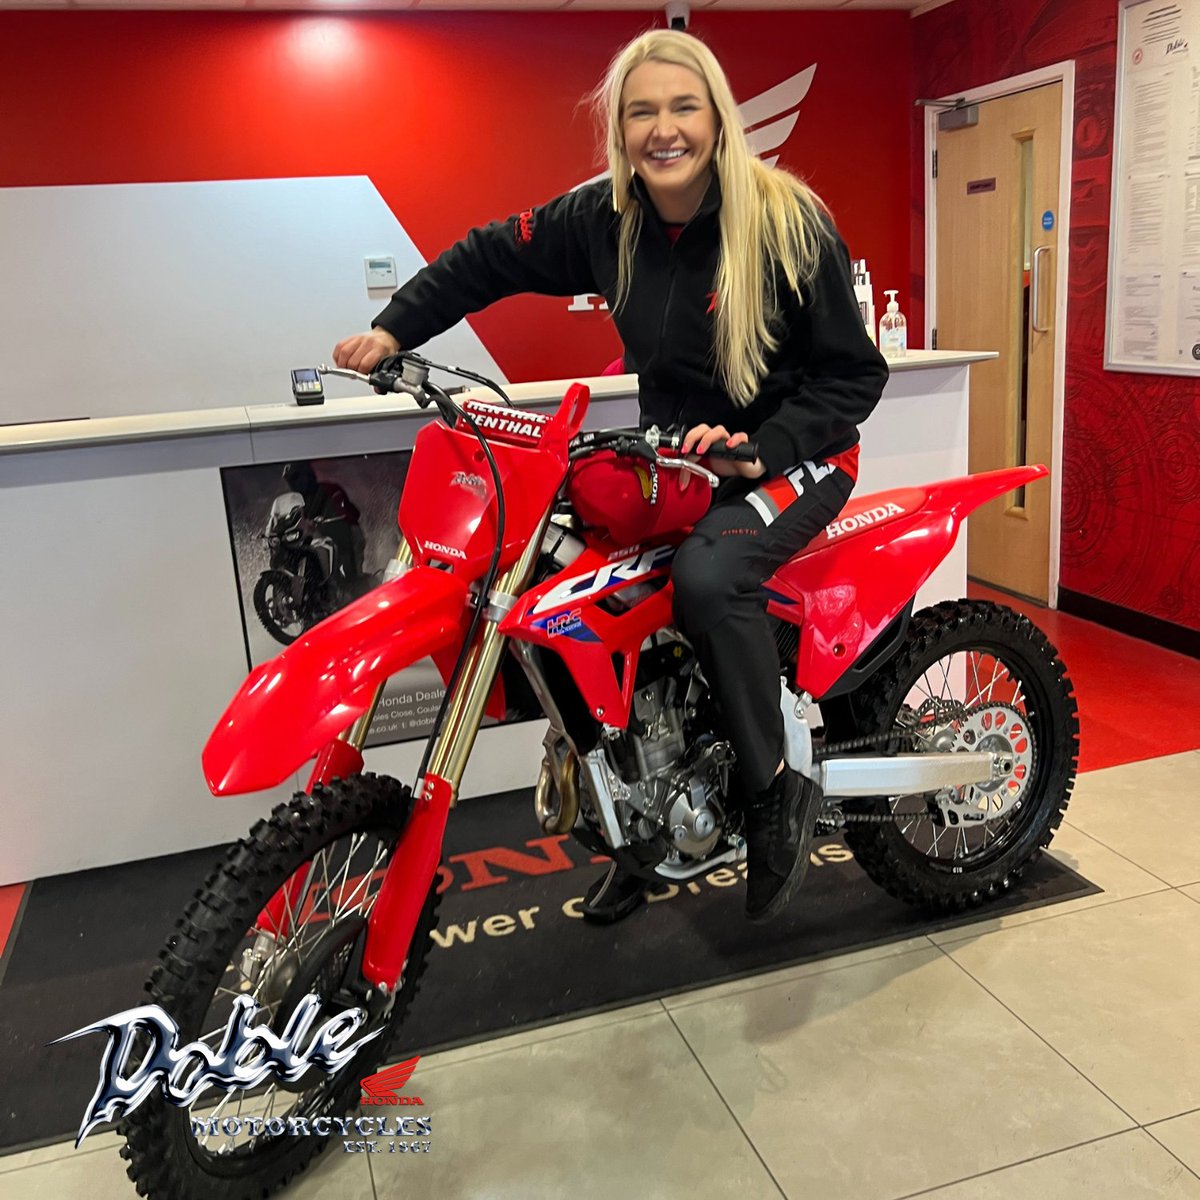 We’re delighted to announce @ievab7 will be representing Team Doble at the upcoming coming @HondaUKBikes CRF250 Cup! Follow her on social media o to keep up to date with her progress! #TeamDoble #WeAreBikers